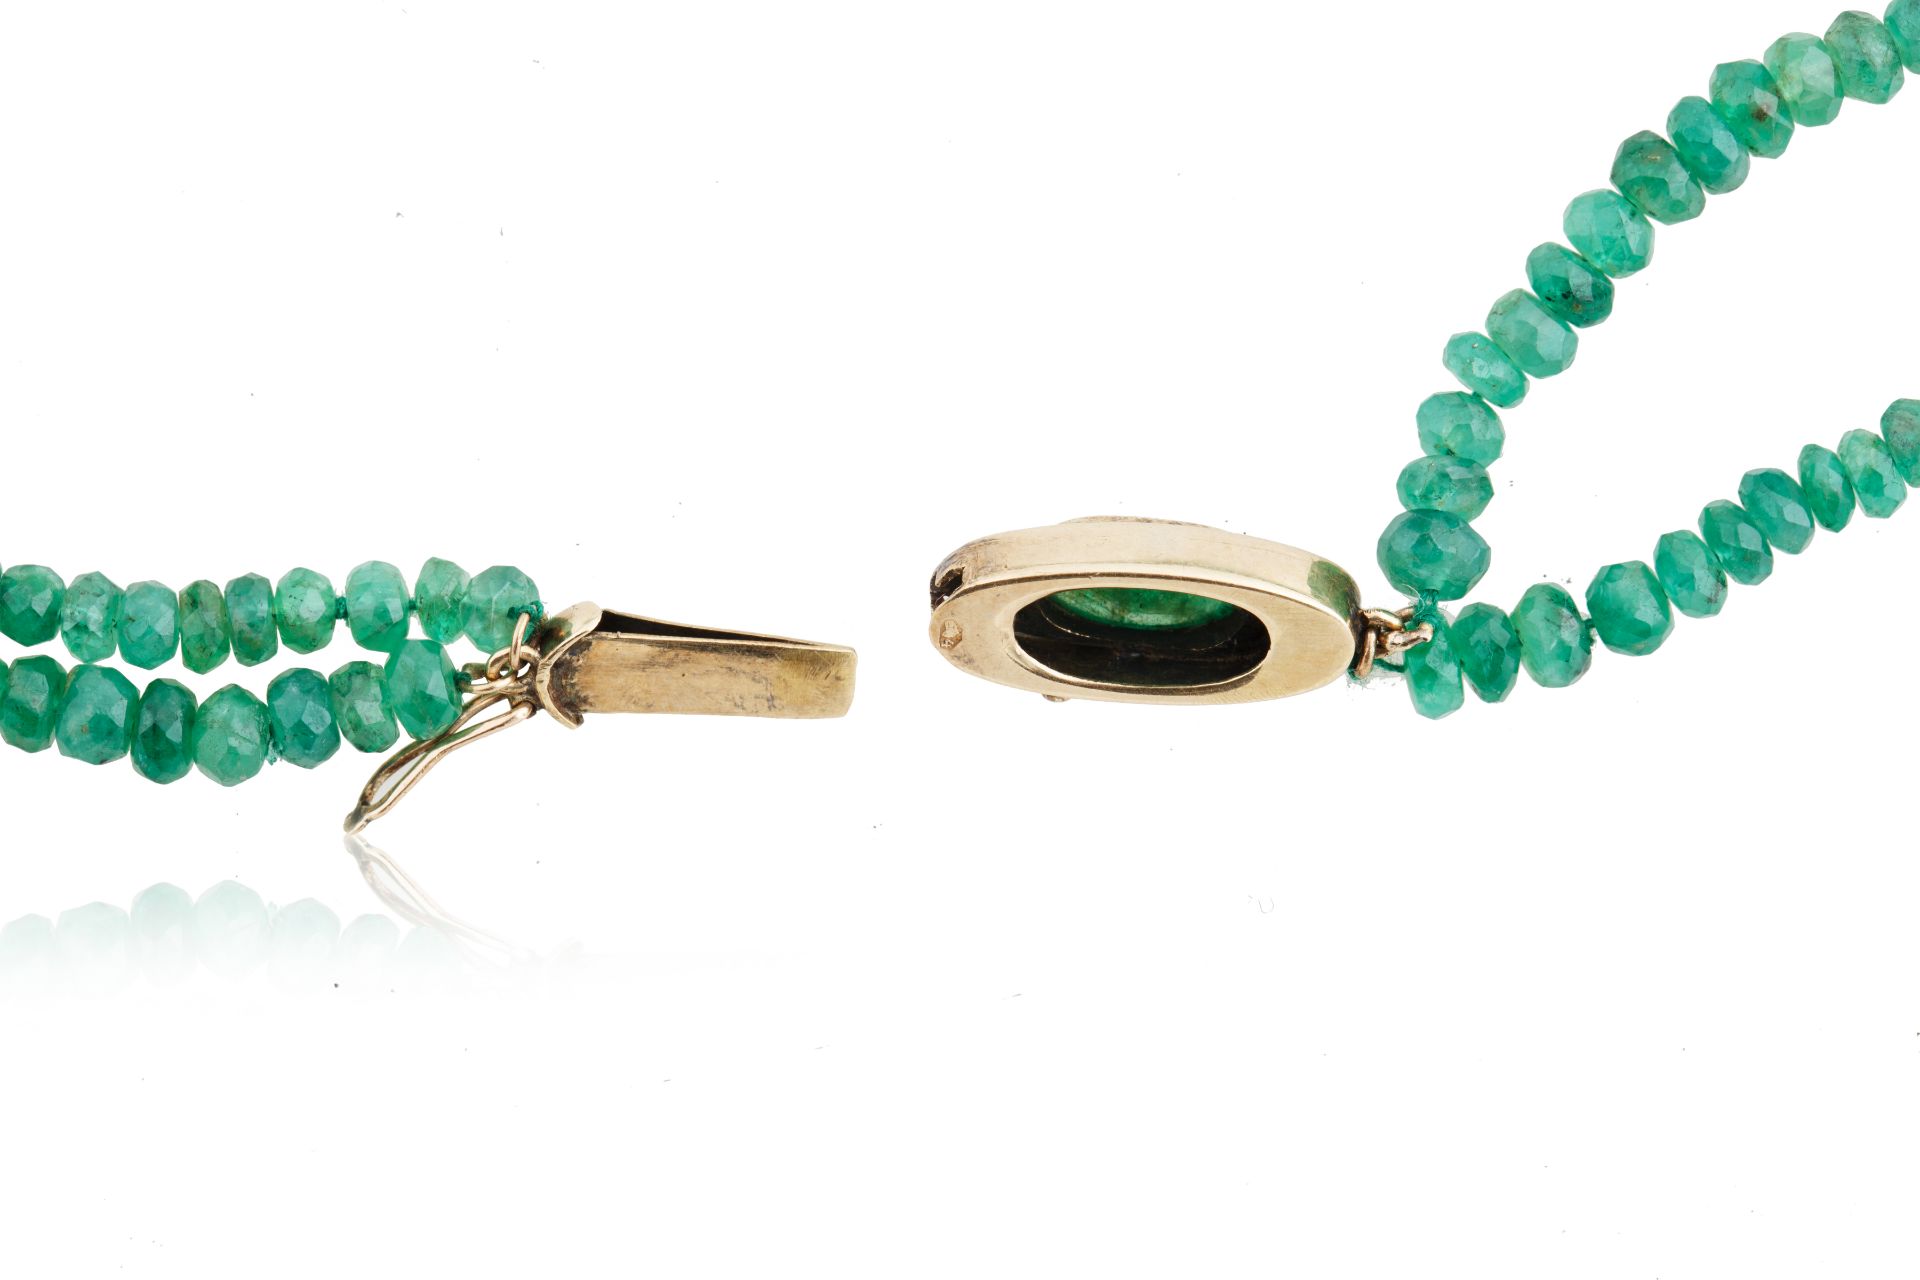 AN EMERALD, DIAMOND AND JADEITE BEADED NECKLACE, LIKELY FRENCH - Image 3 of 5